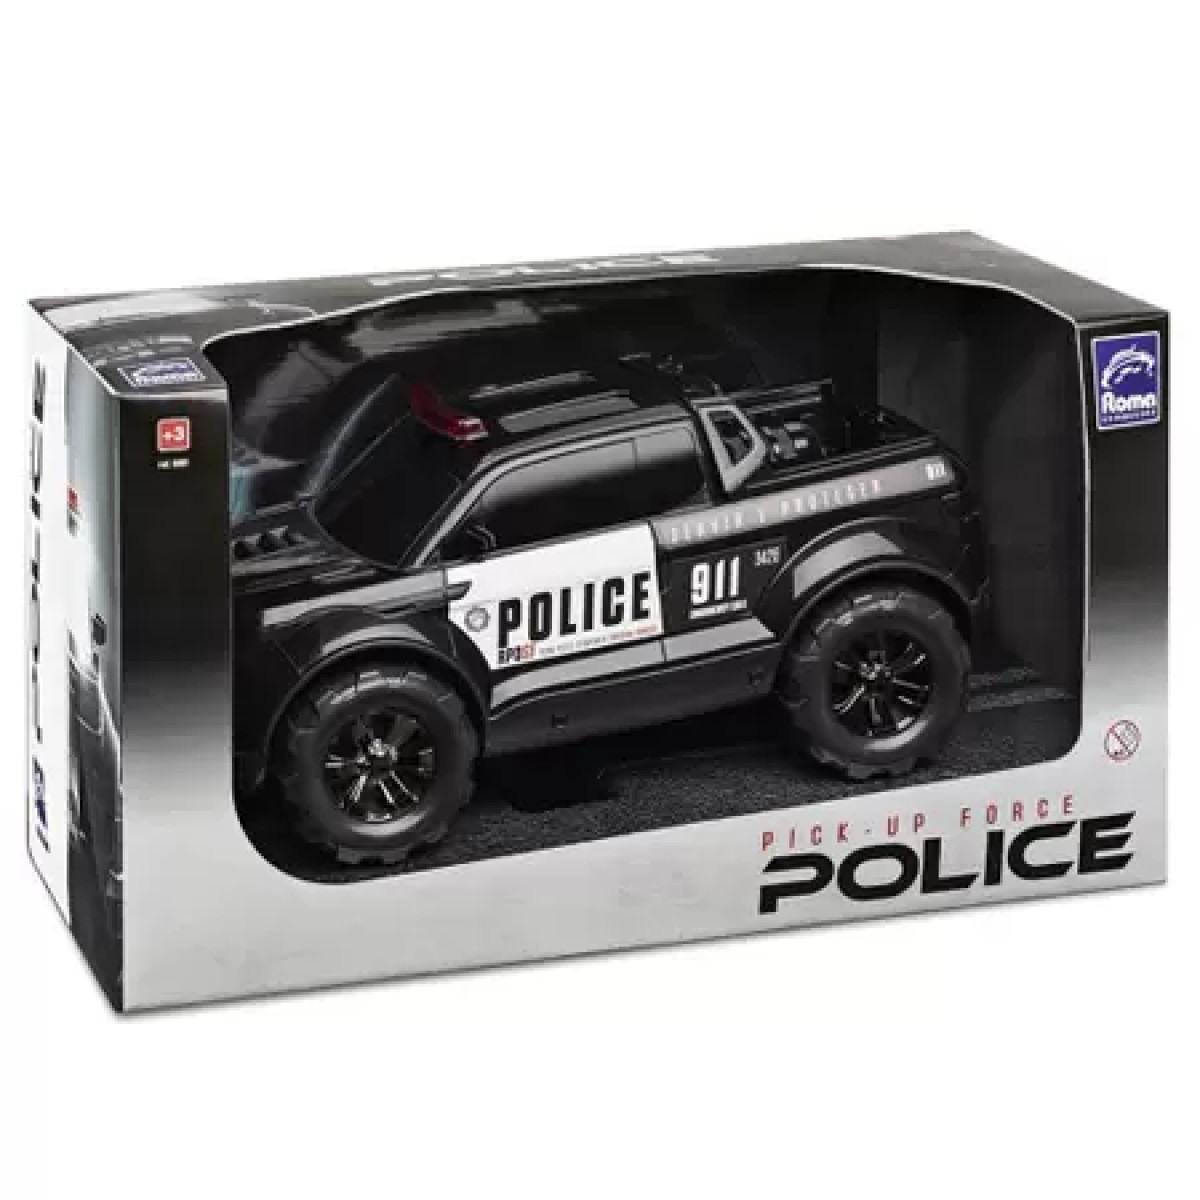 ROMA PICK UP FORCE POLICE 0991